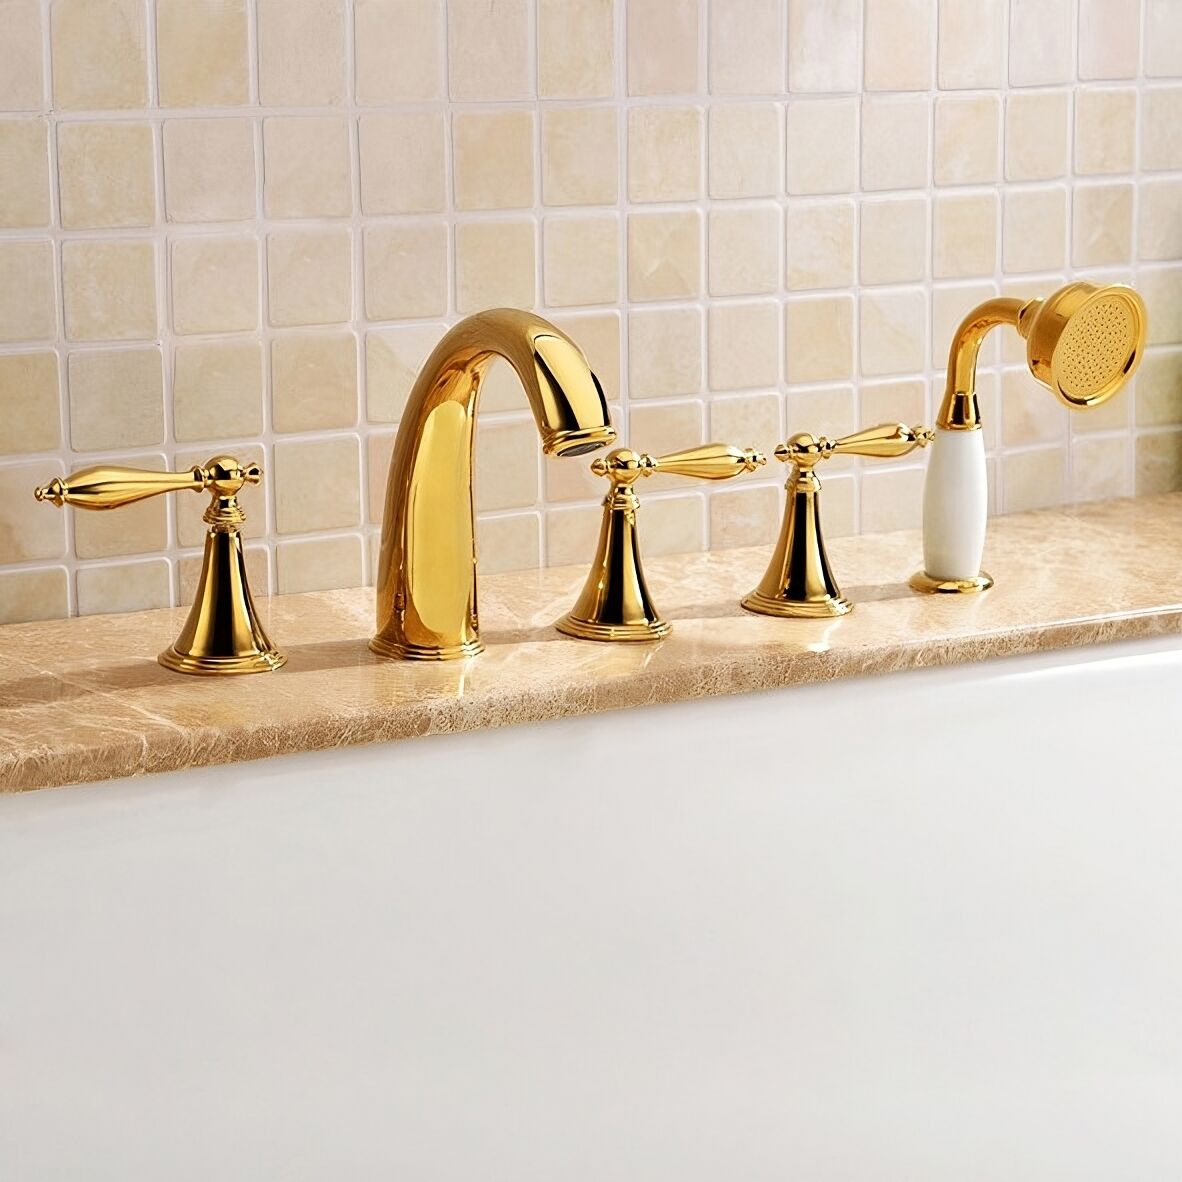 Homary Deck Mounted Roman Bathtub Faucet with Handshower Solid Brass in Gold